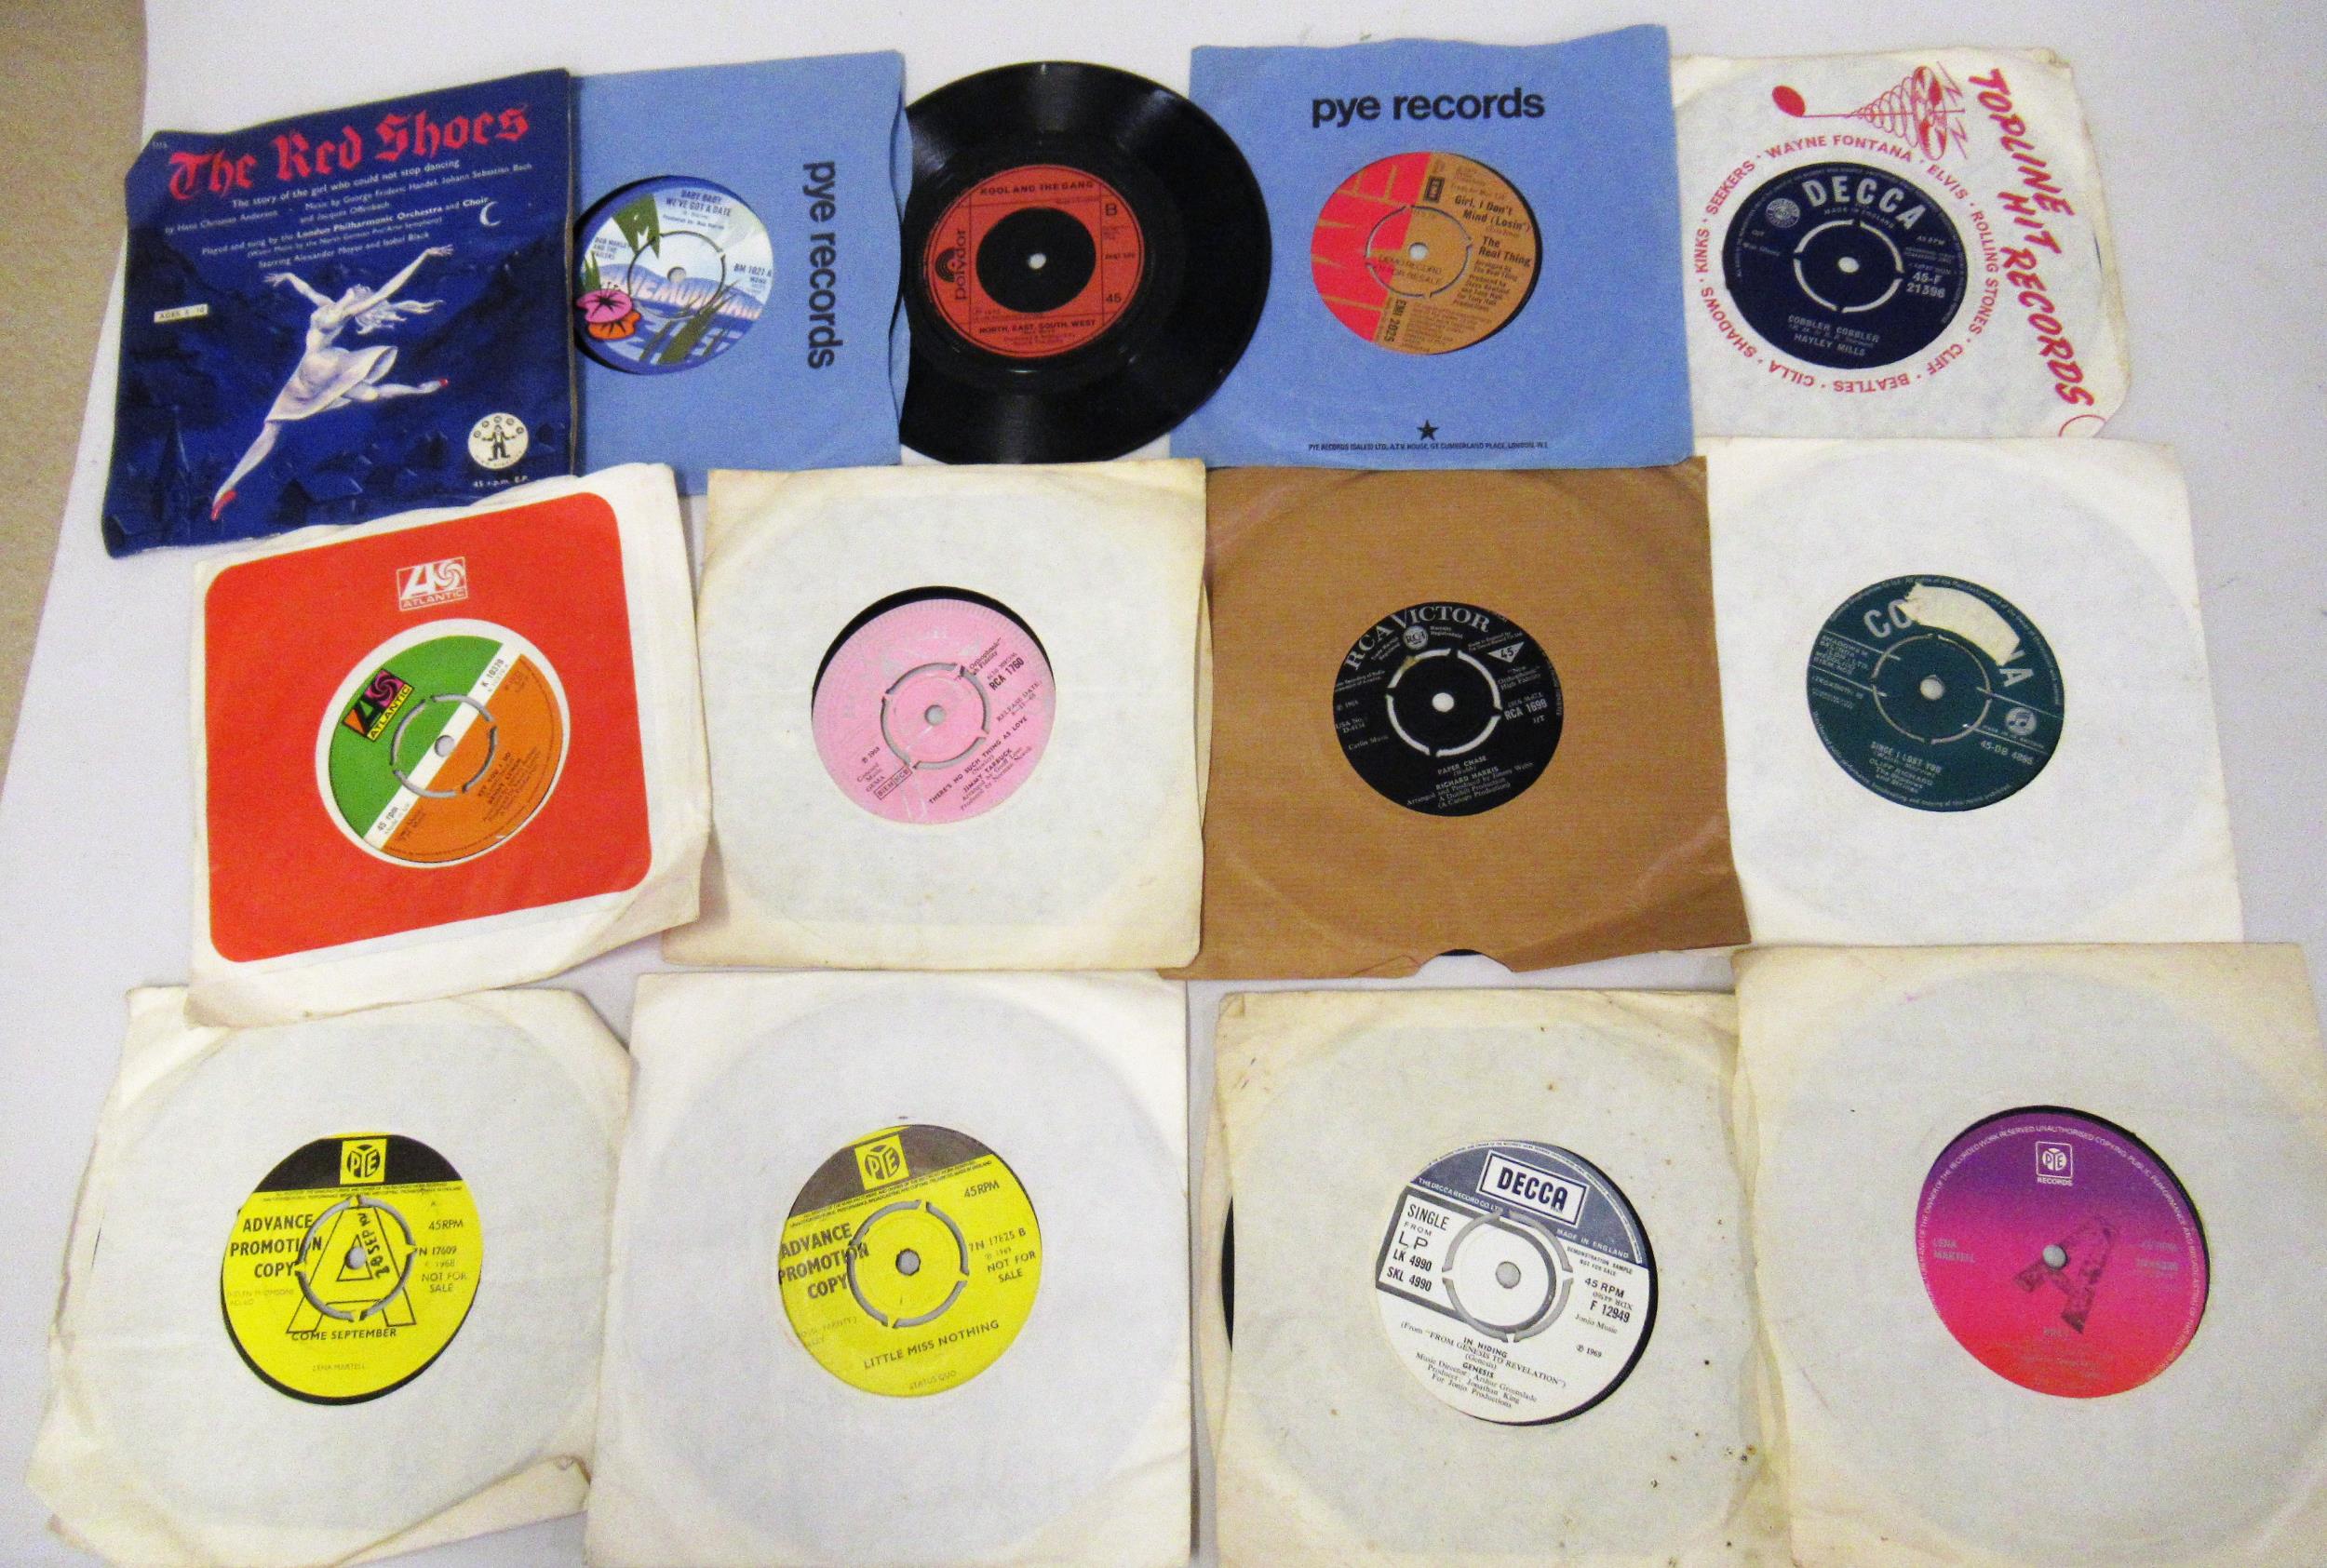 Small collection of late 1960's 45rpm singles including two advance promotion copies for Lena